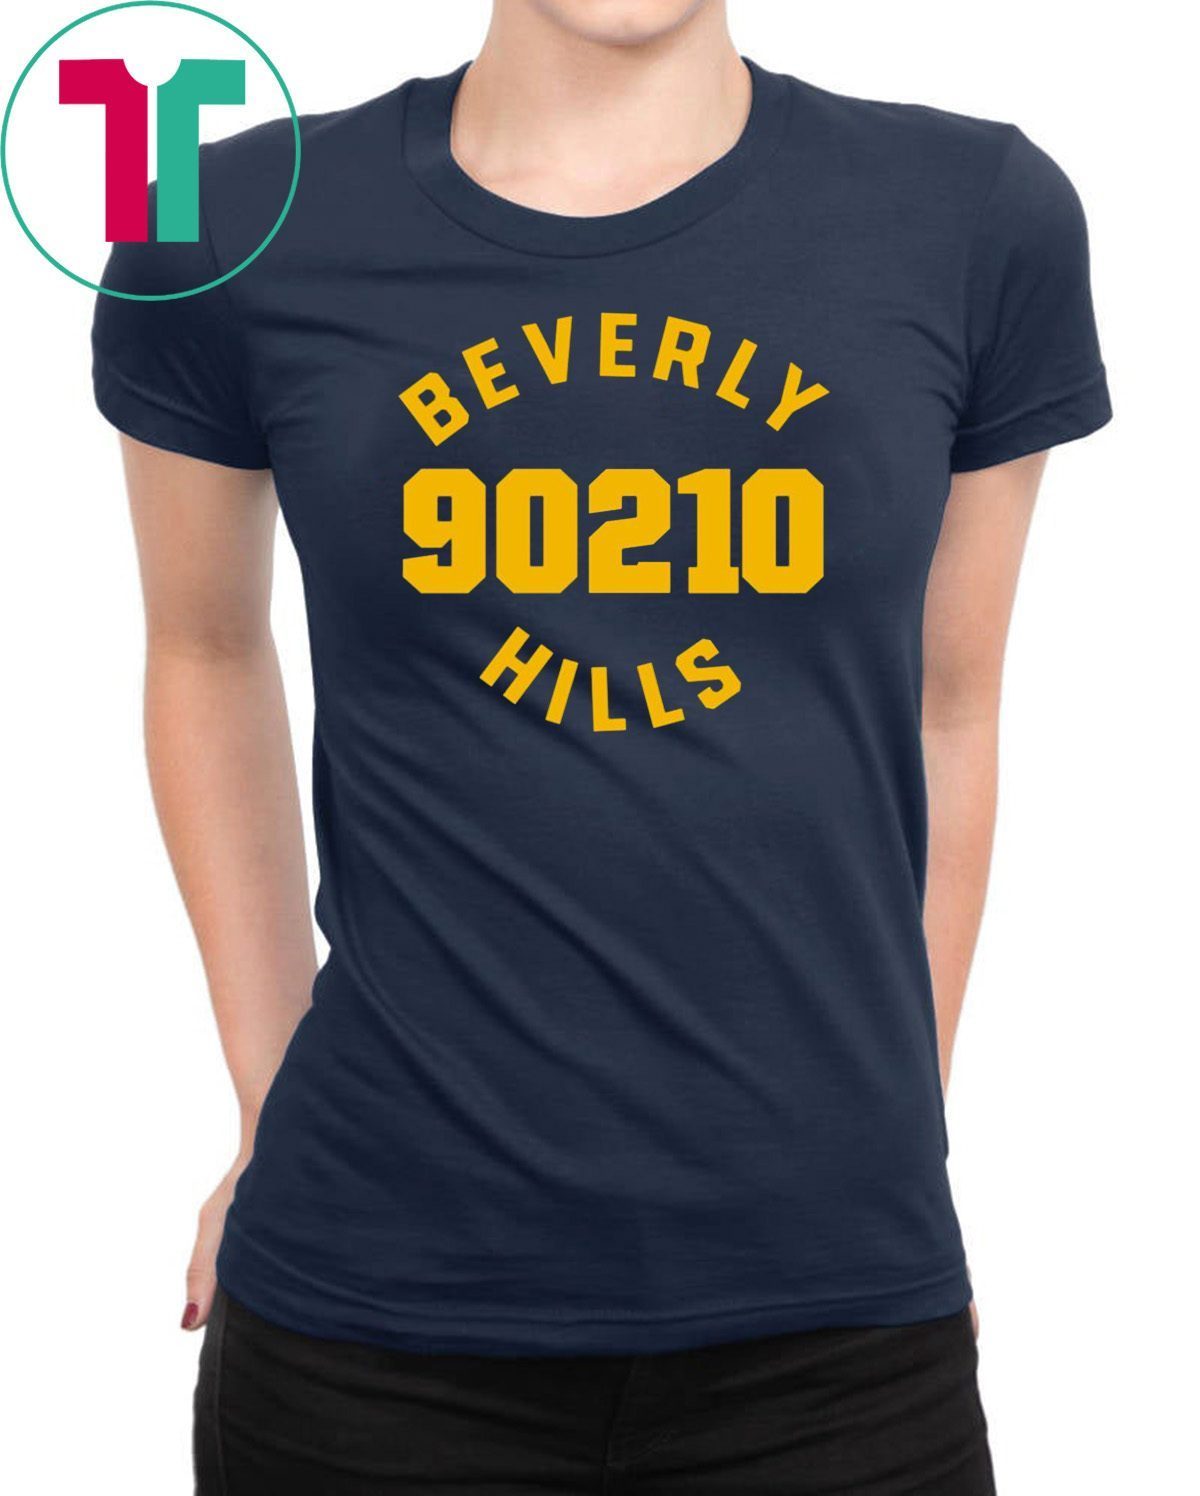 Details about   Beverly Hills 90210 Wbhh Toddler T-Shirt 